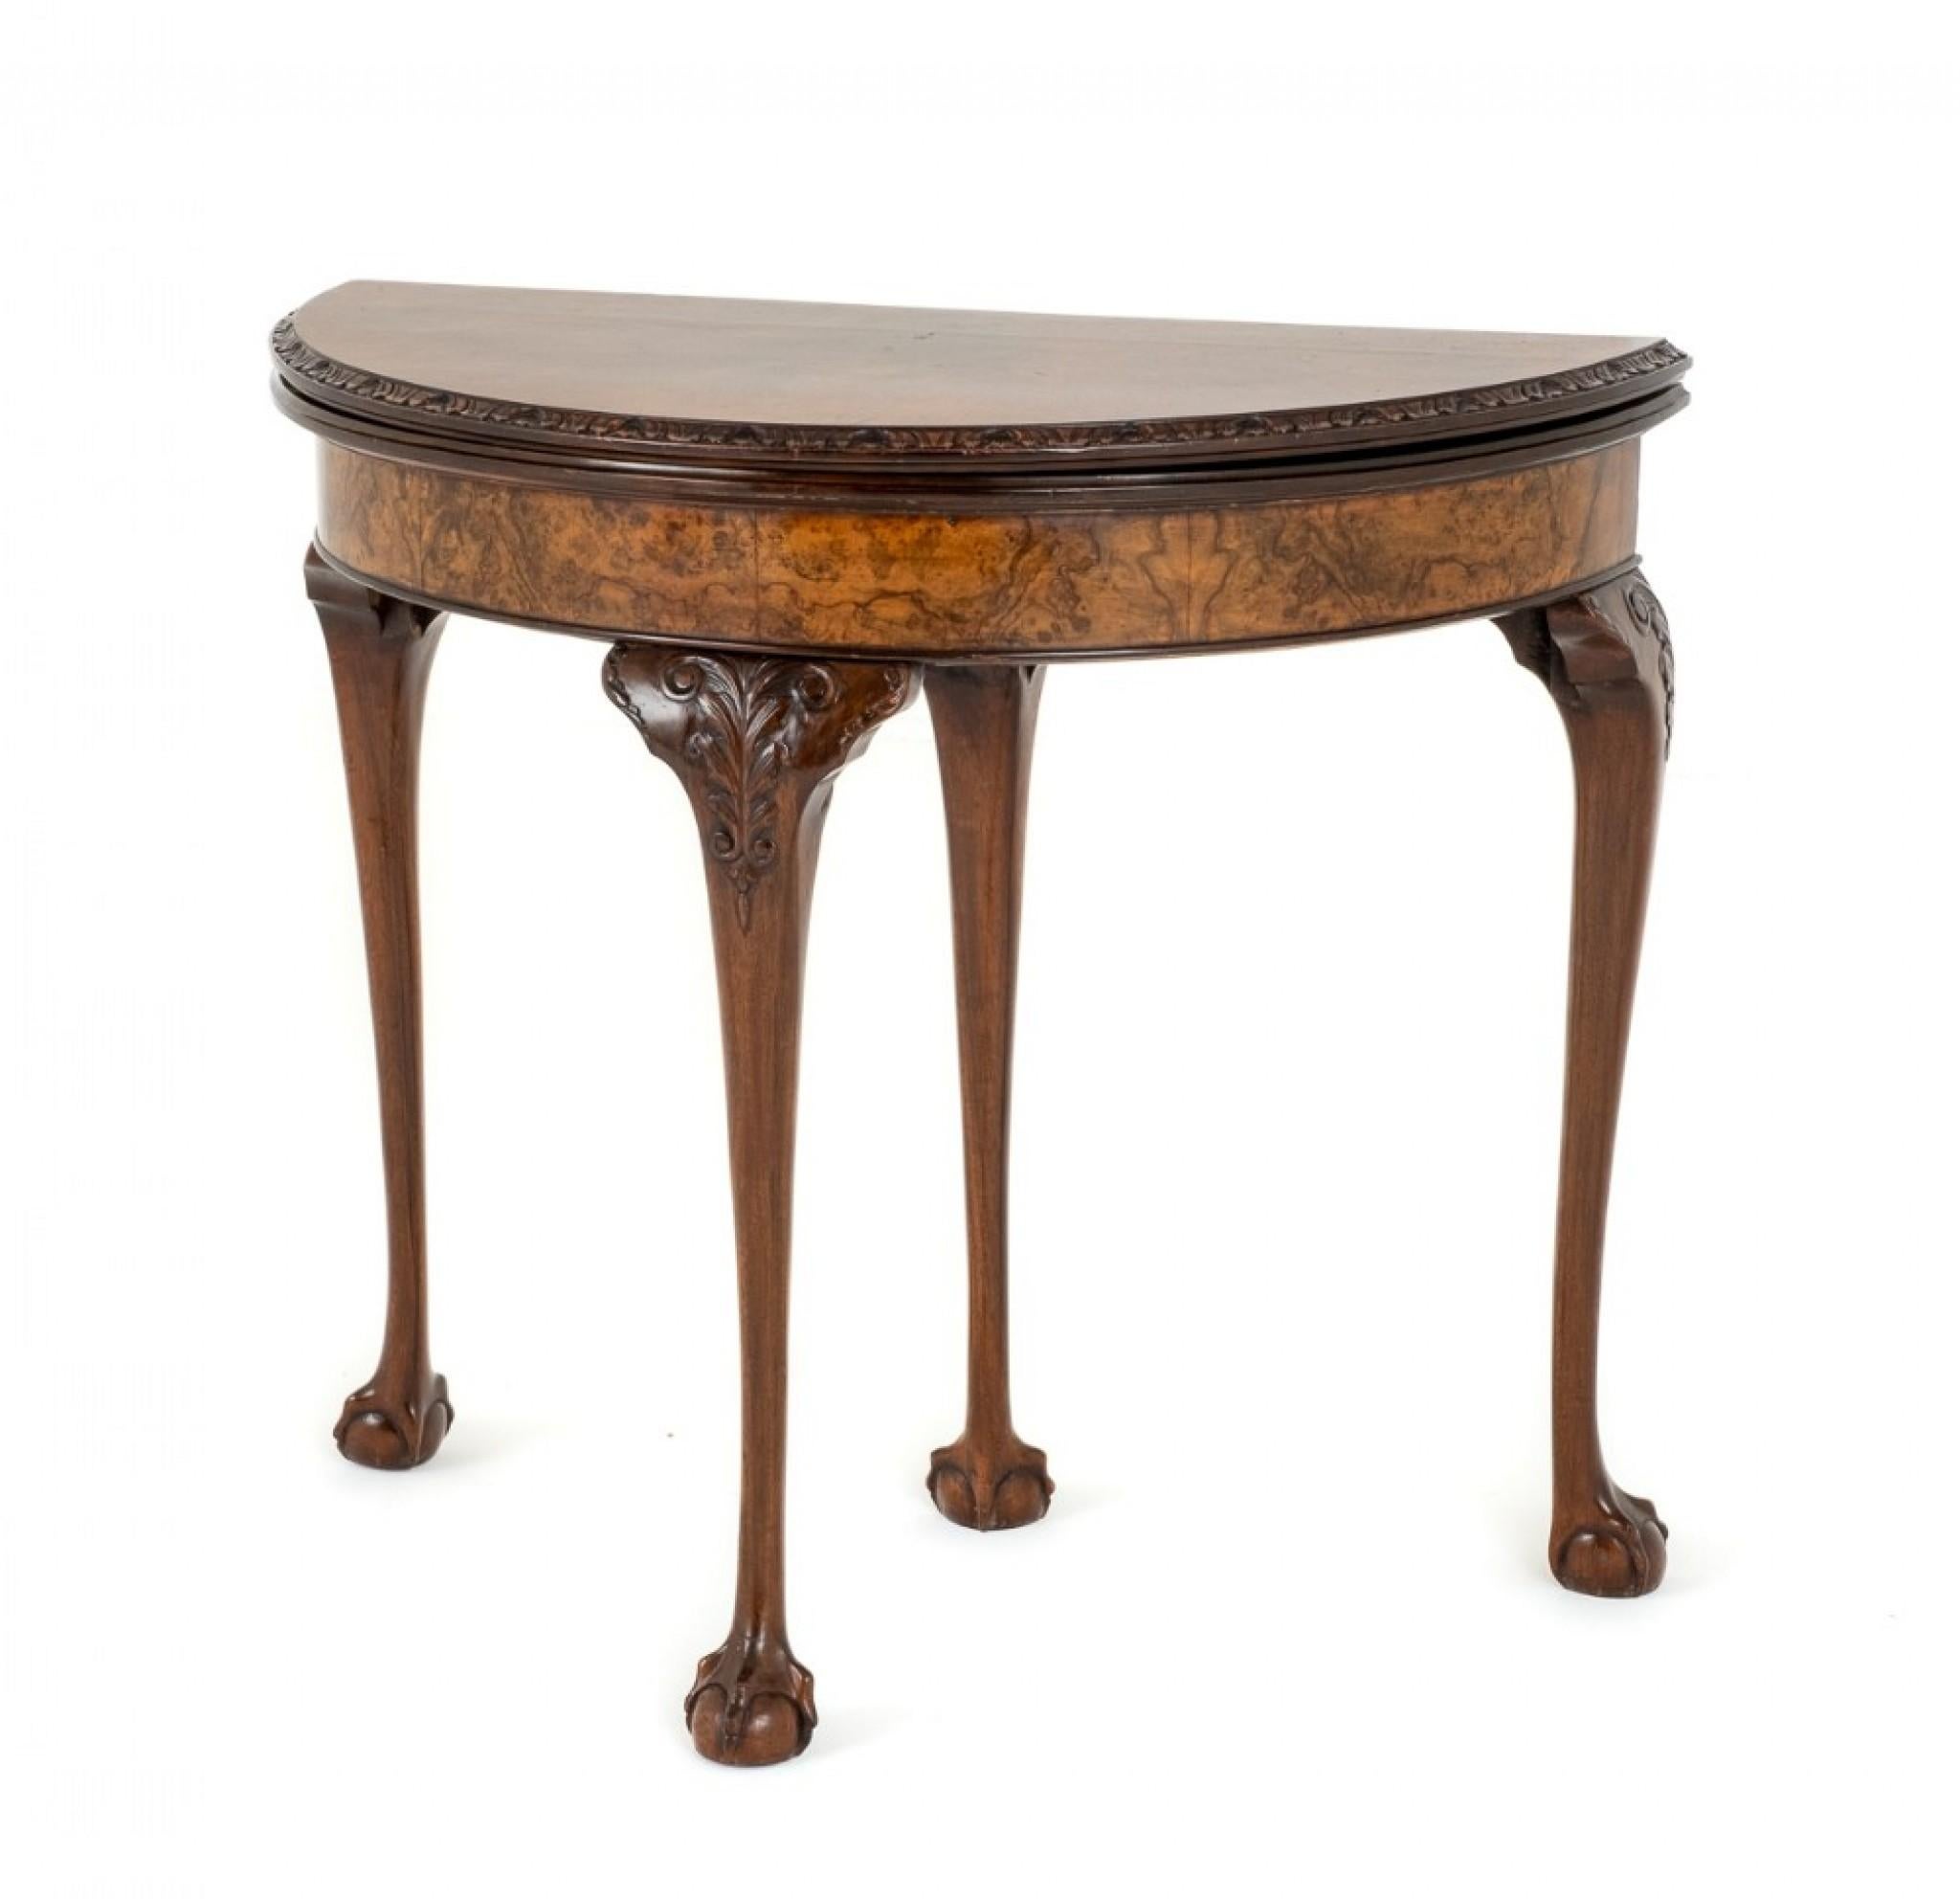 Queen Anne Style Burr walnut Demi Lune Card Table.
This Card Table Stands upon Shaped Legs with Boldy Carved Ball and Claw Feet.
Circa 1920
The Top of The Legs Having Carved Leaves etc.
The Back of the Table Having a Pullout Drawer for ones Cards,